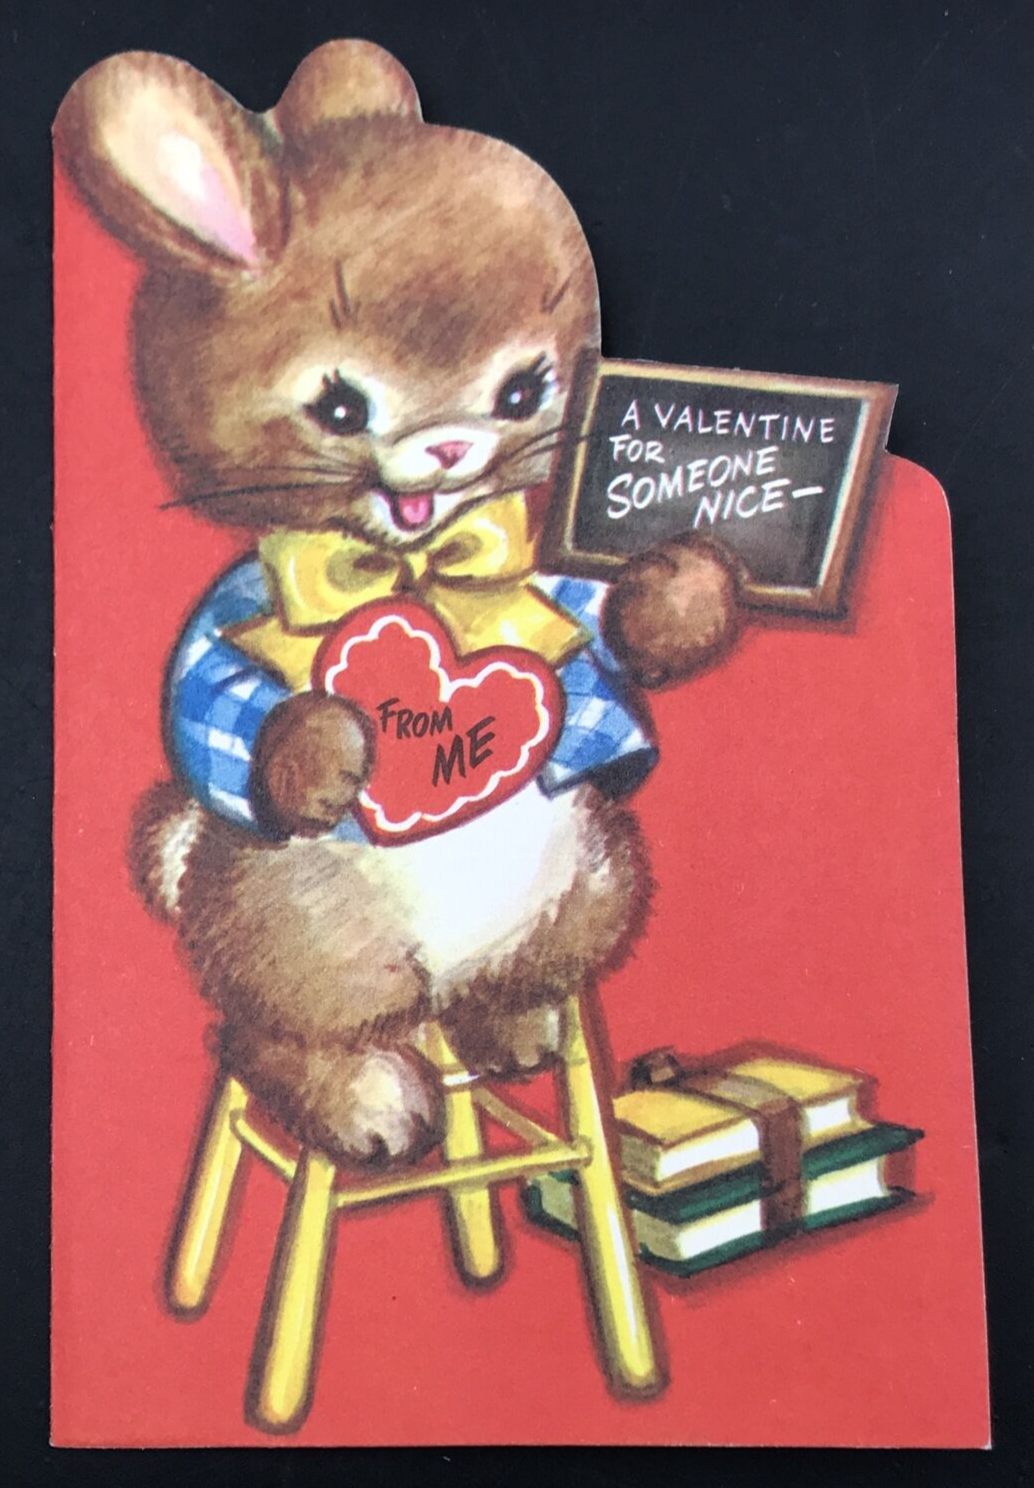 Primary image for 1950s Rust Craft Bunny Rabbit Student Anthropomorphic Valentine Greeting Card